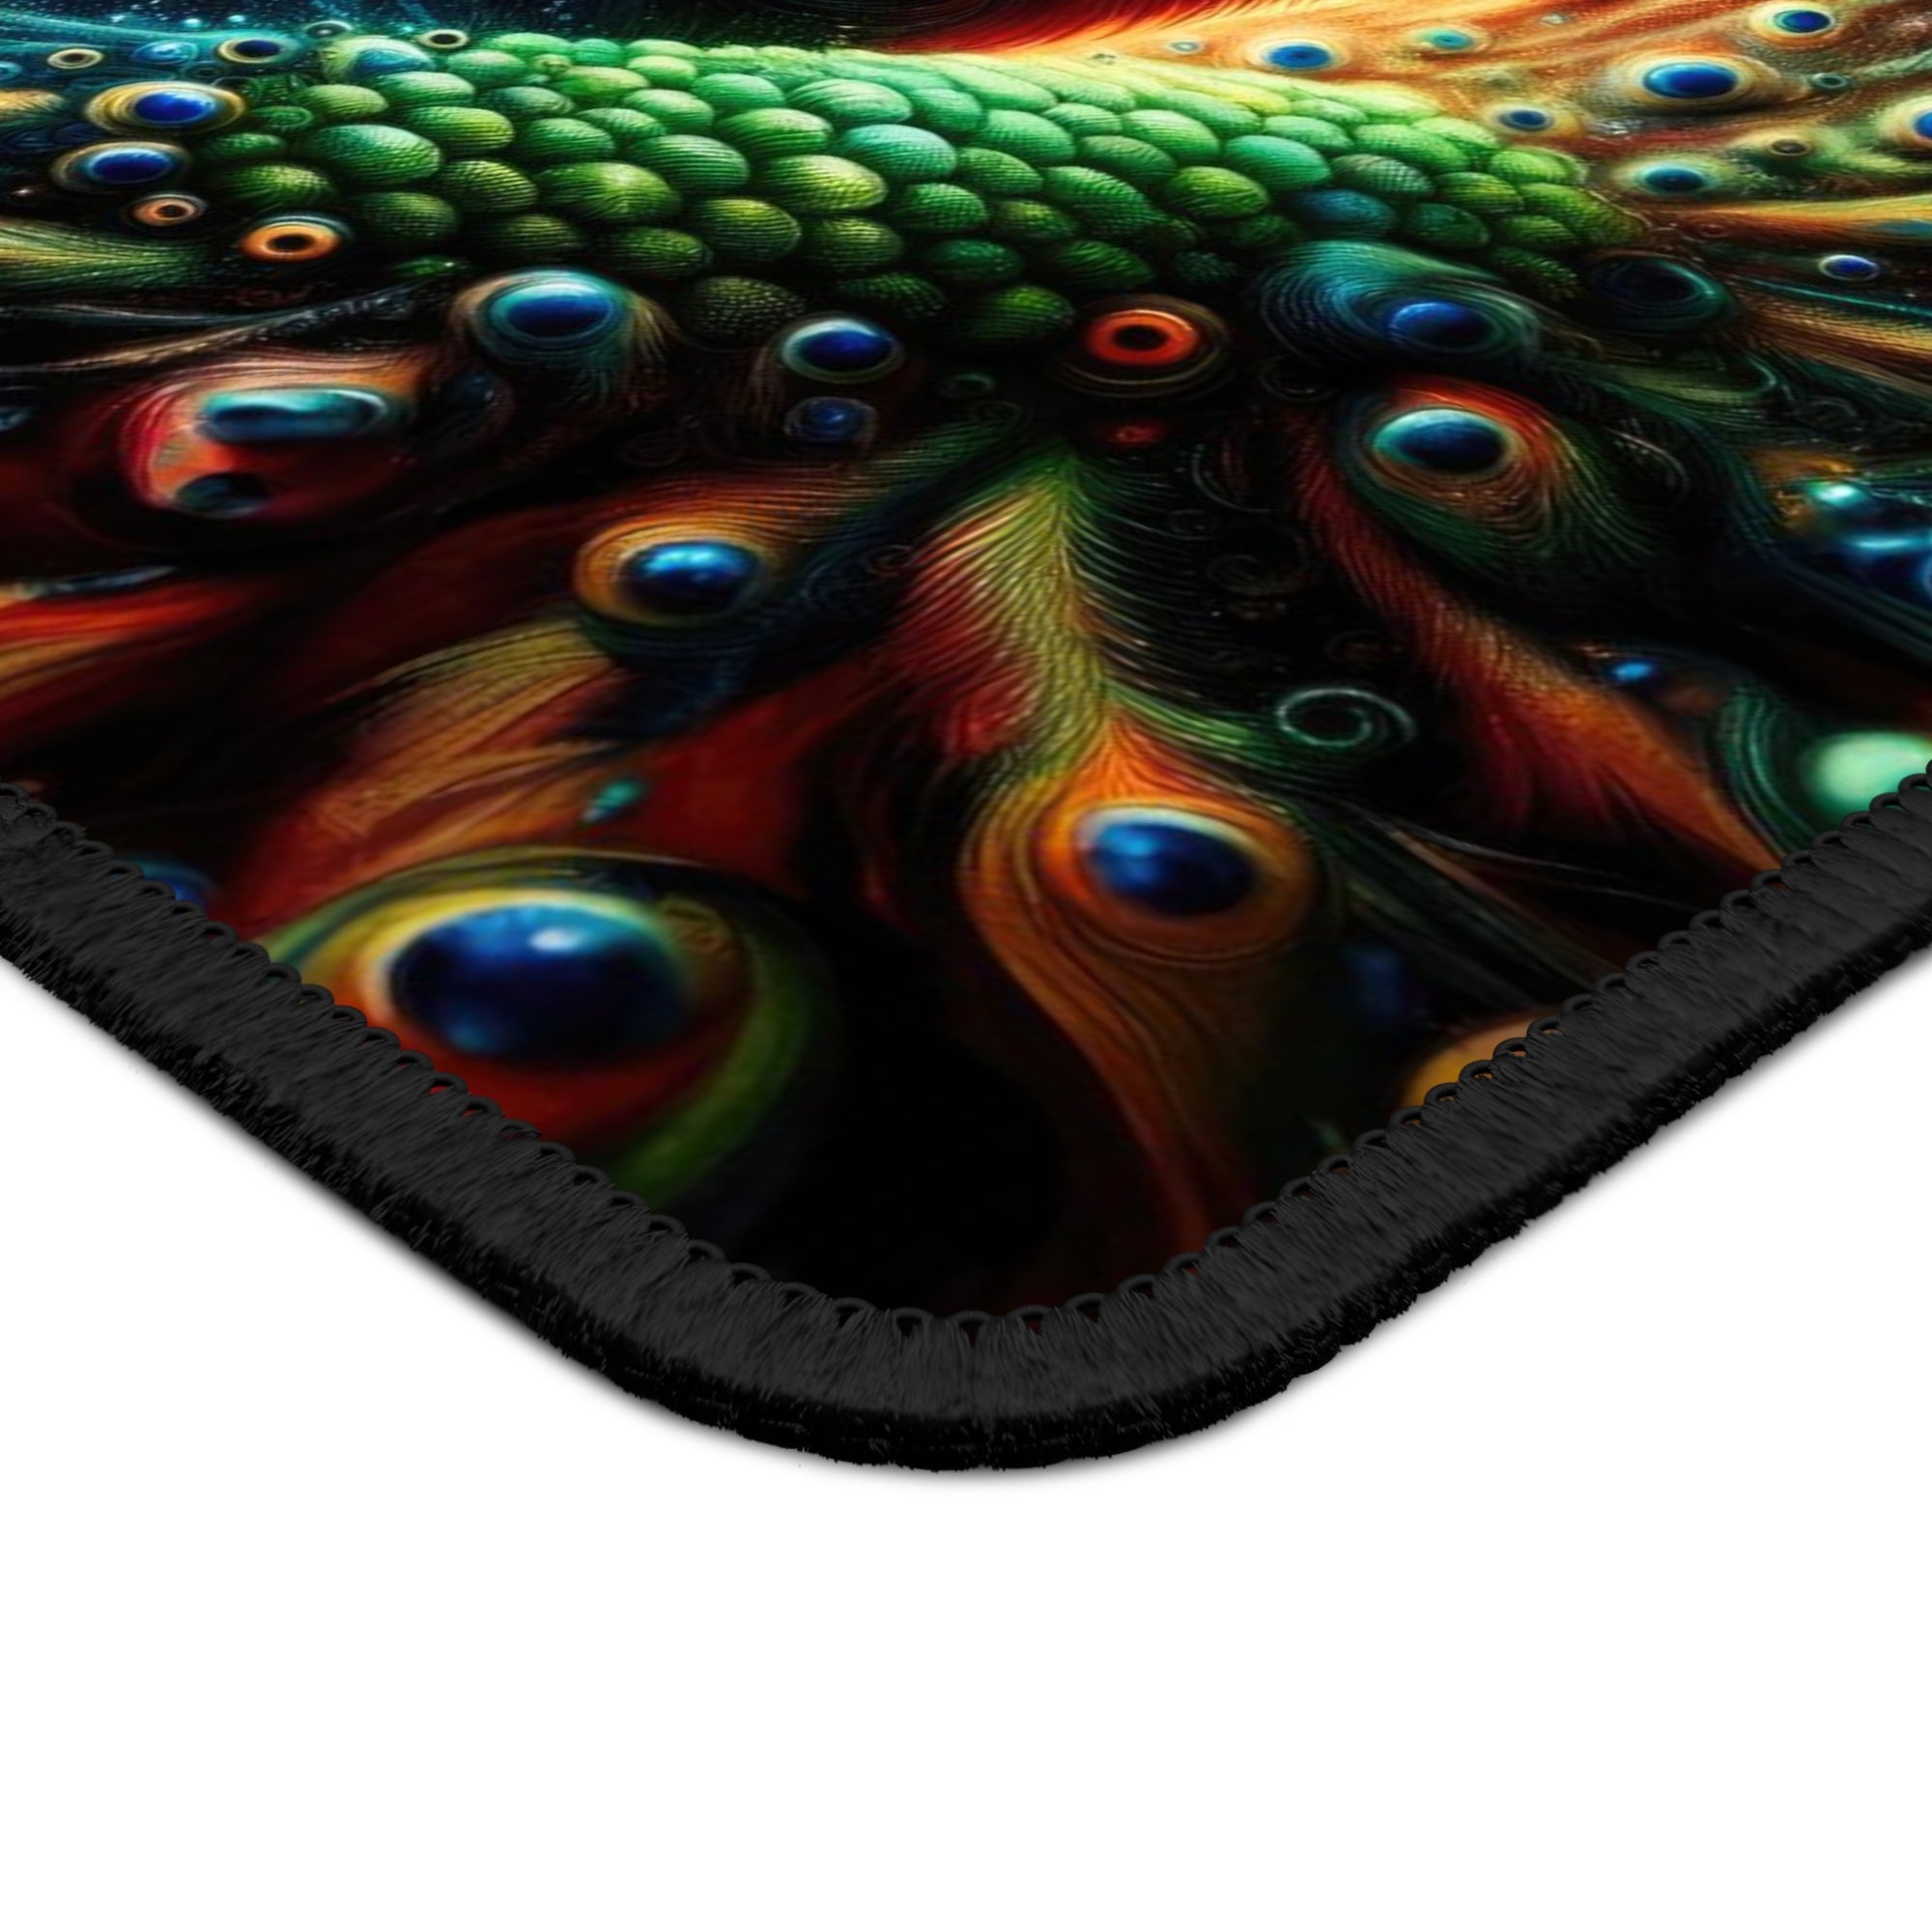 Celestial Quill Ballet Gaming Mouse Pad